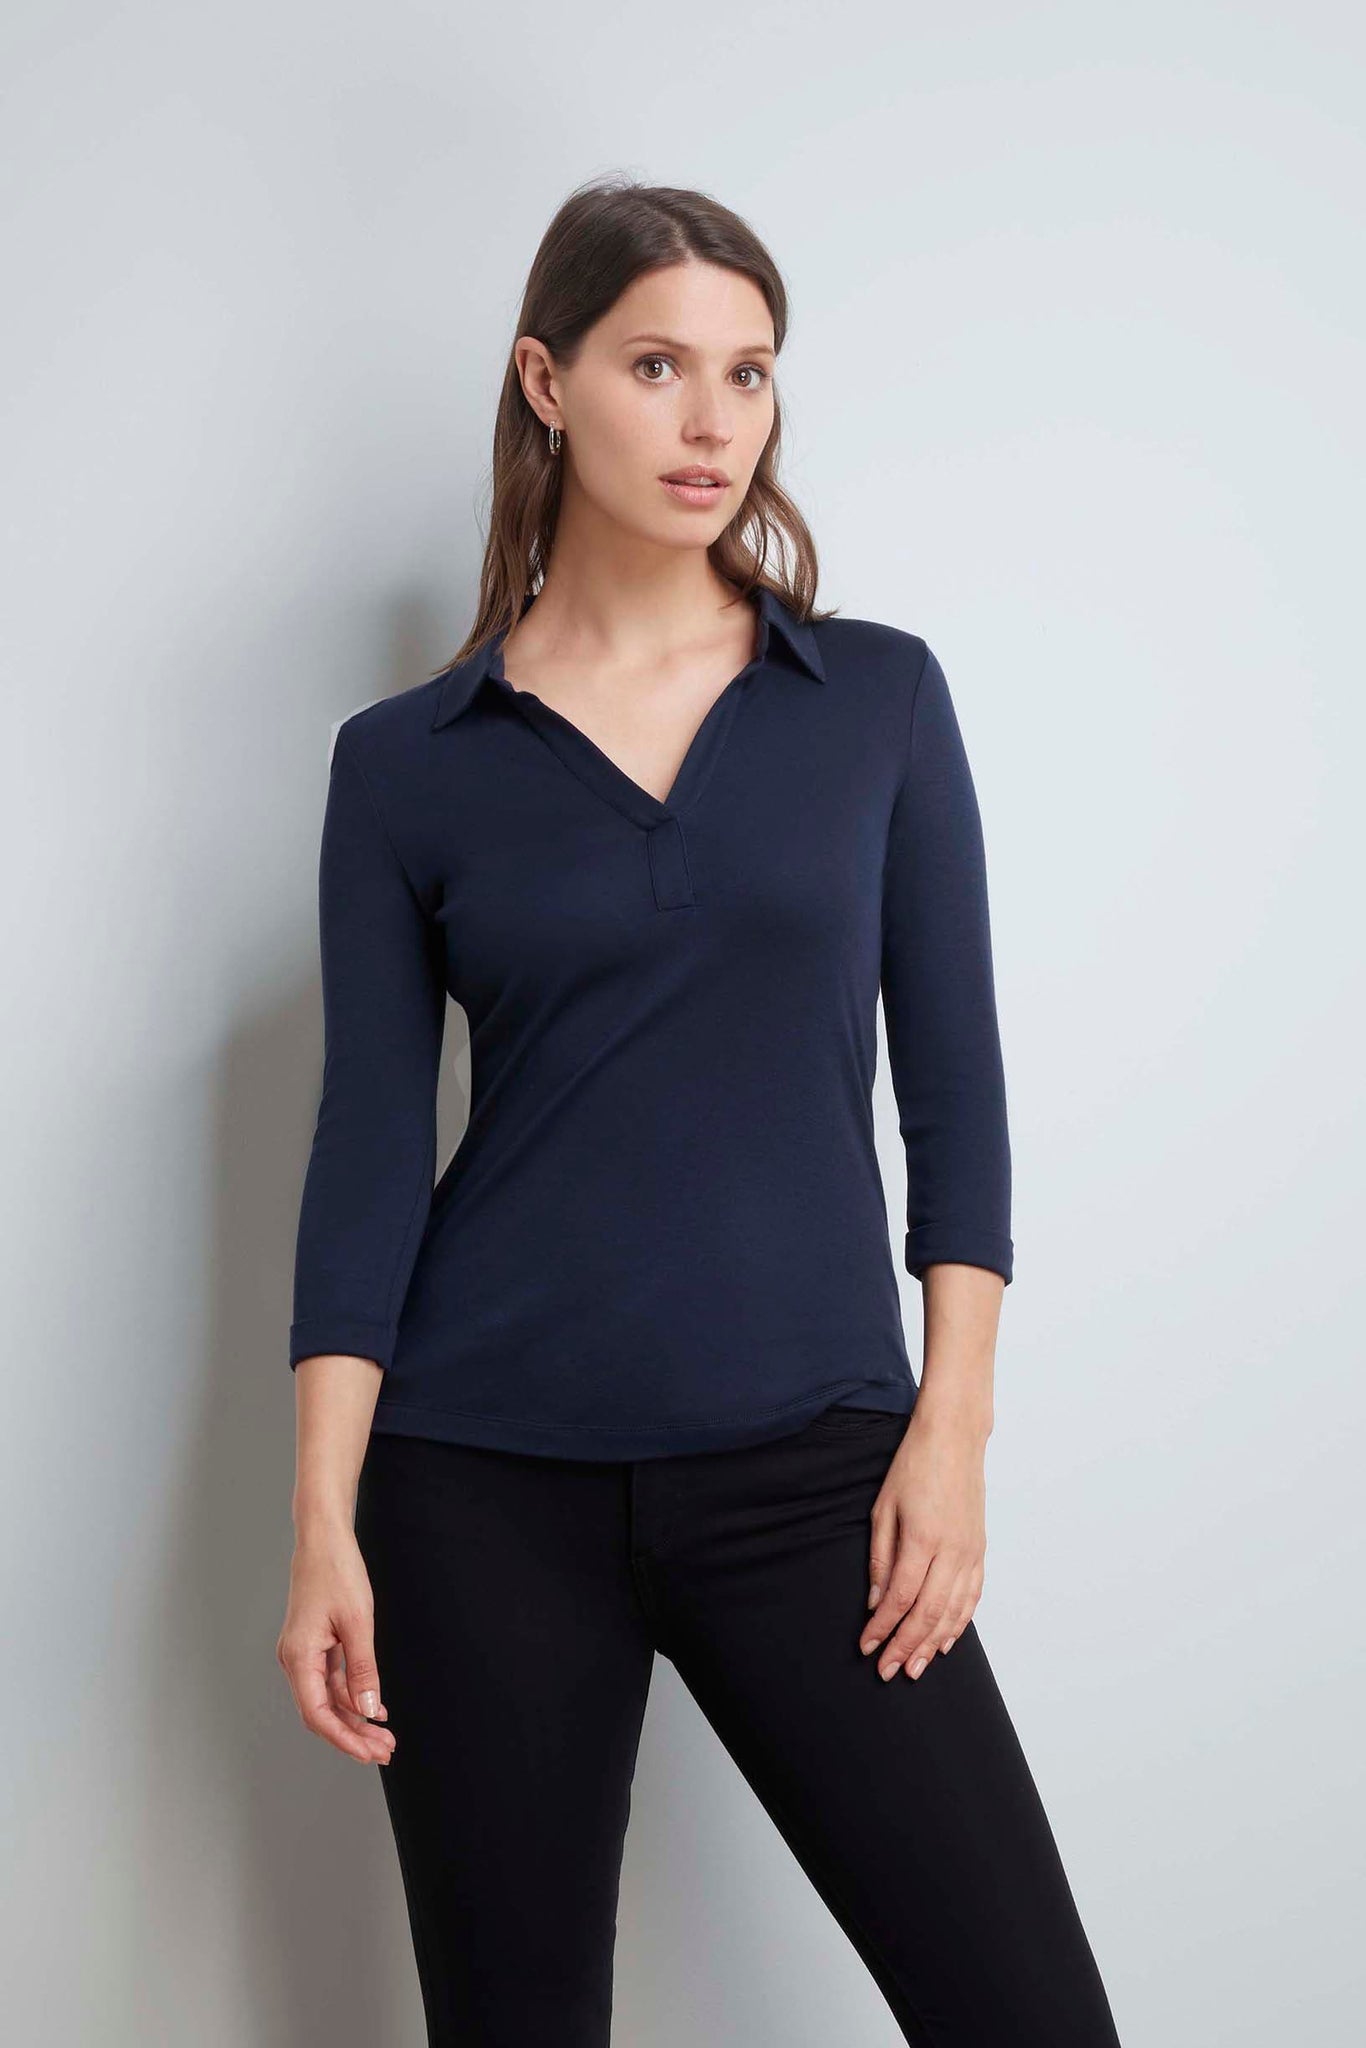 Womens Navy 3/4 Sleeve Collared Cotton Modal Blend T-Shirt by Lavender Hill Clothing